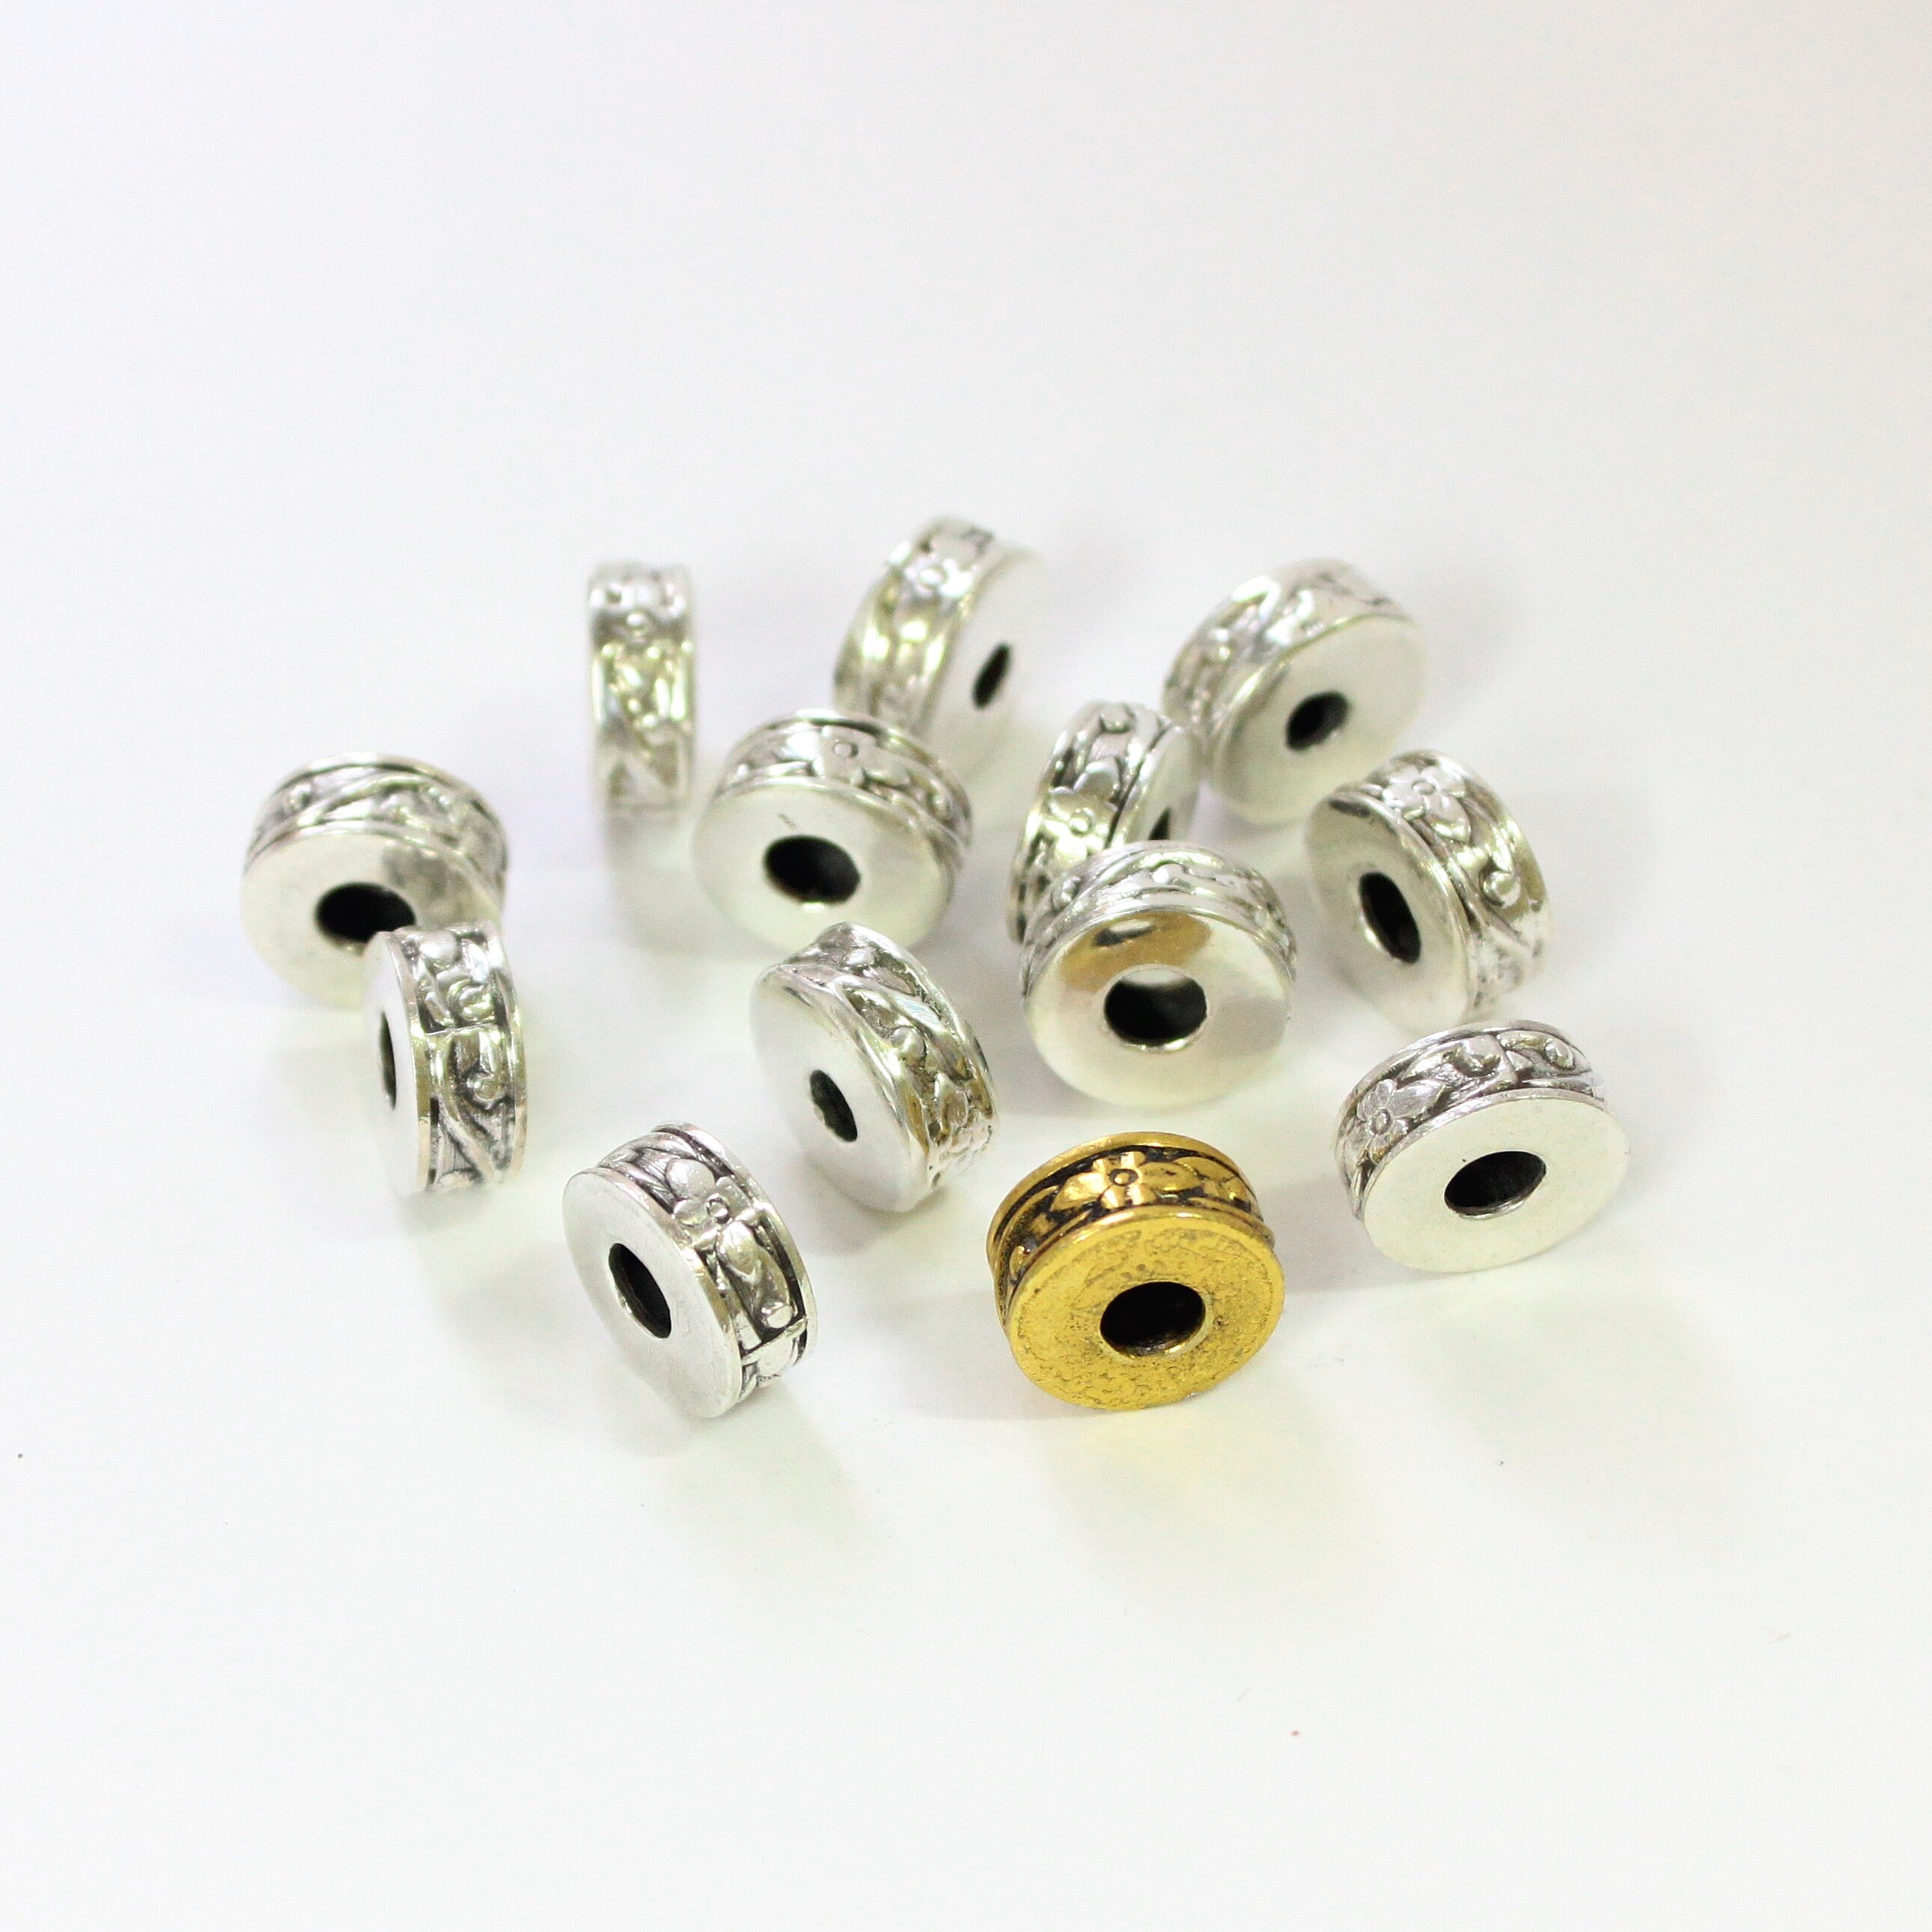 3.5mm Sterling Silver Flat Spacer Bead